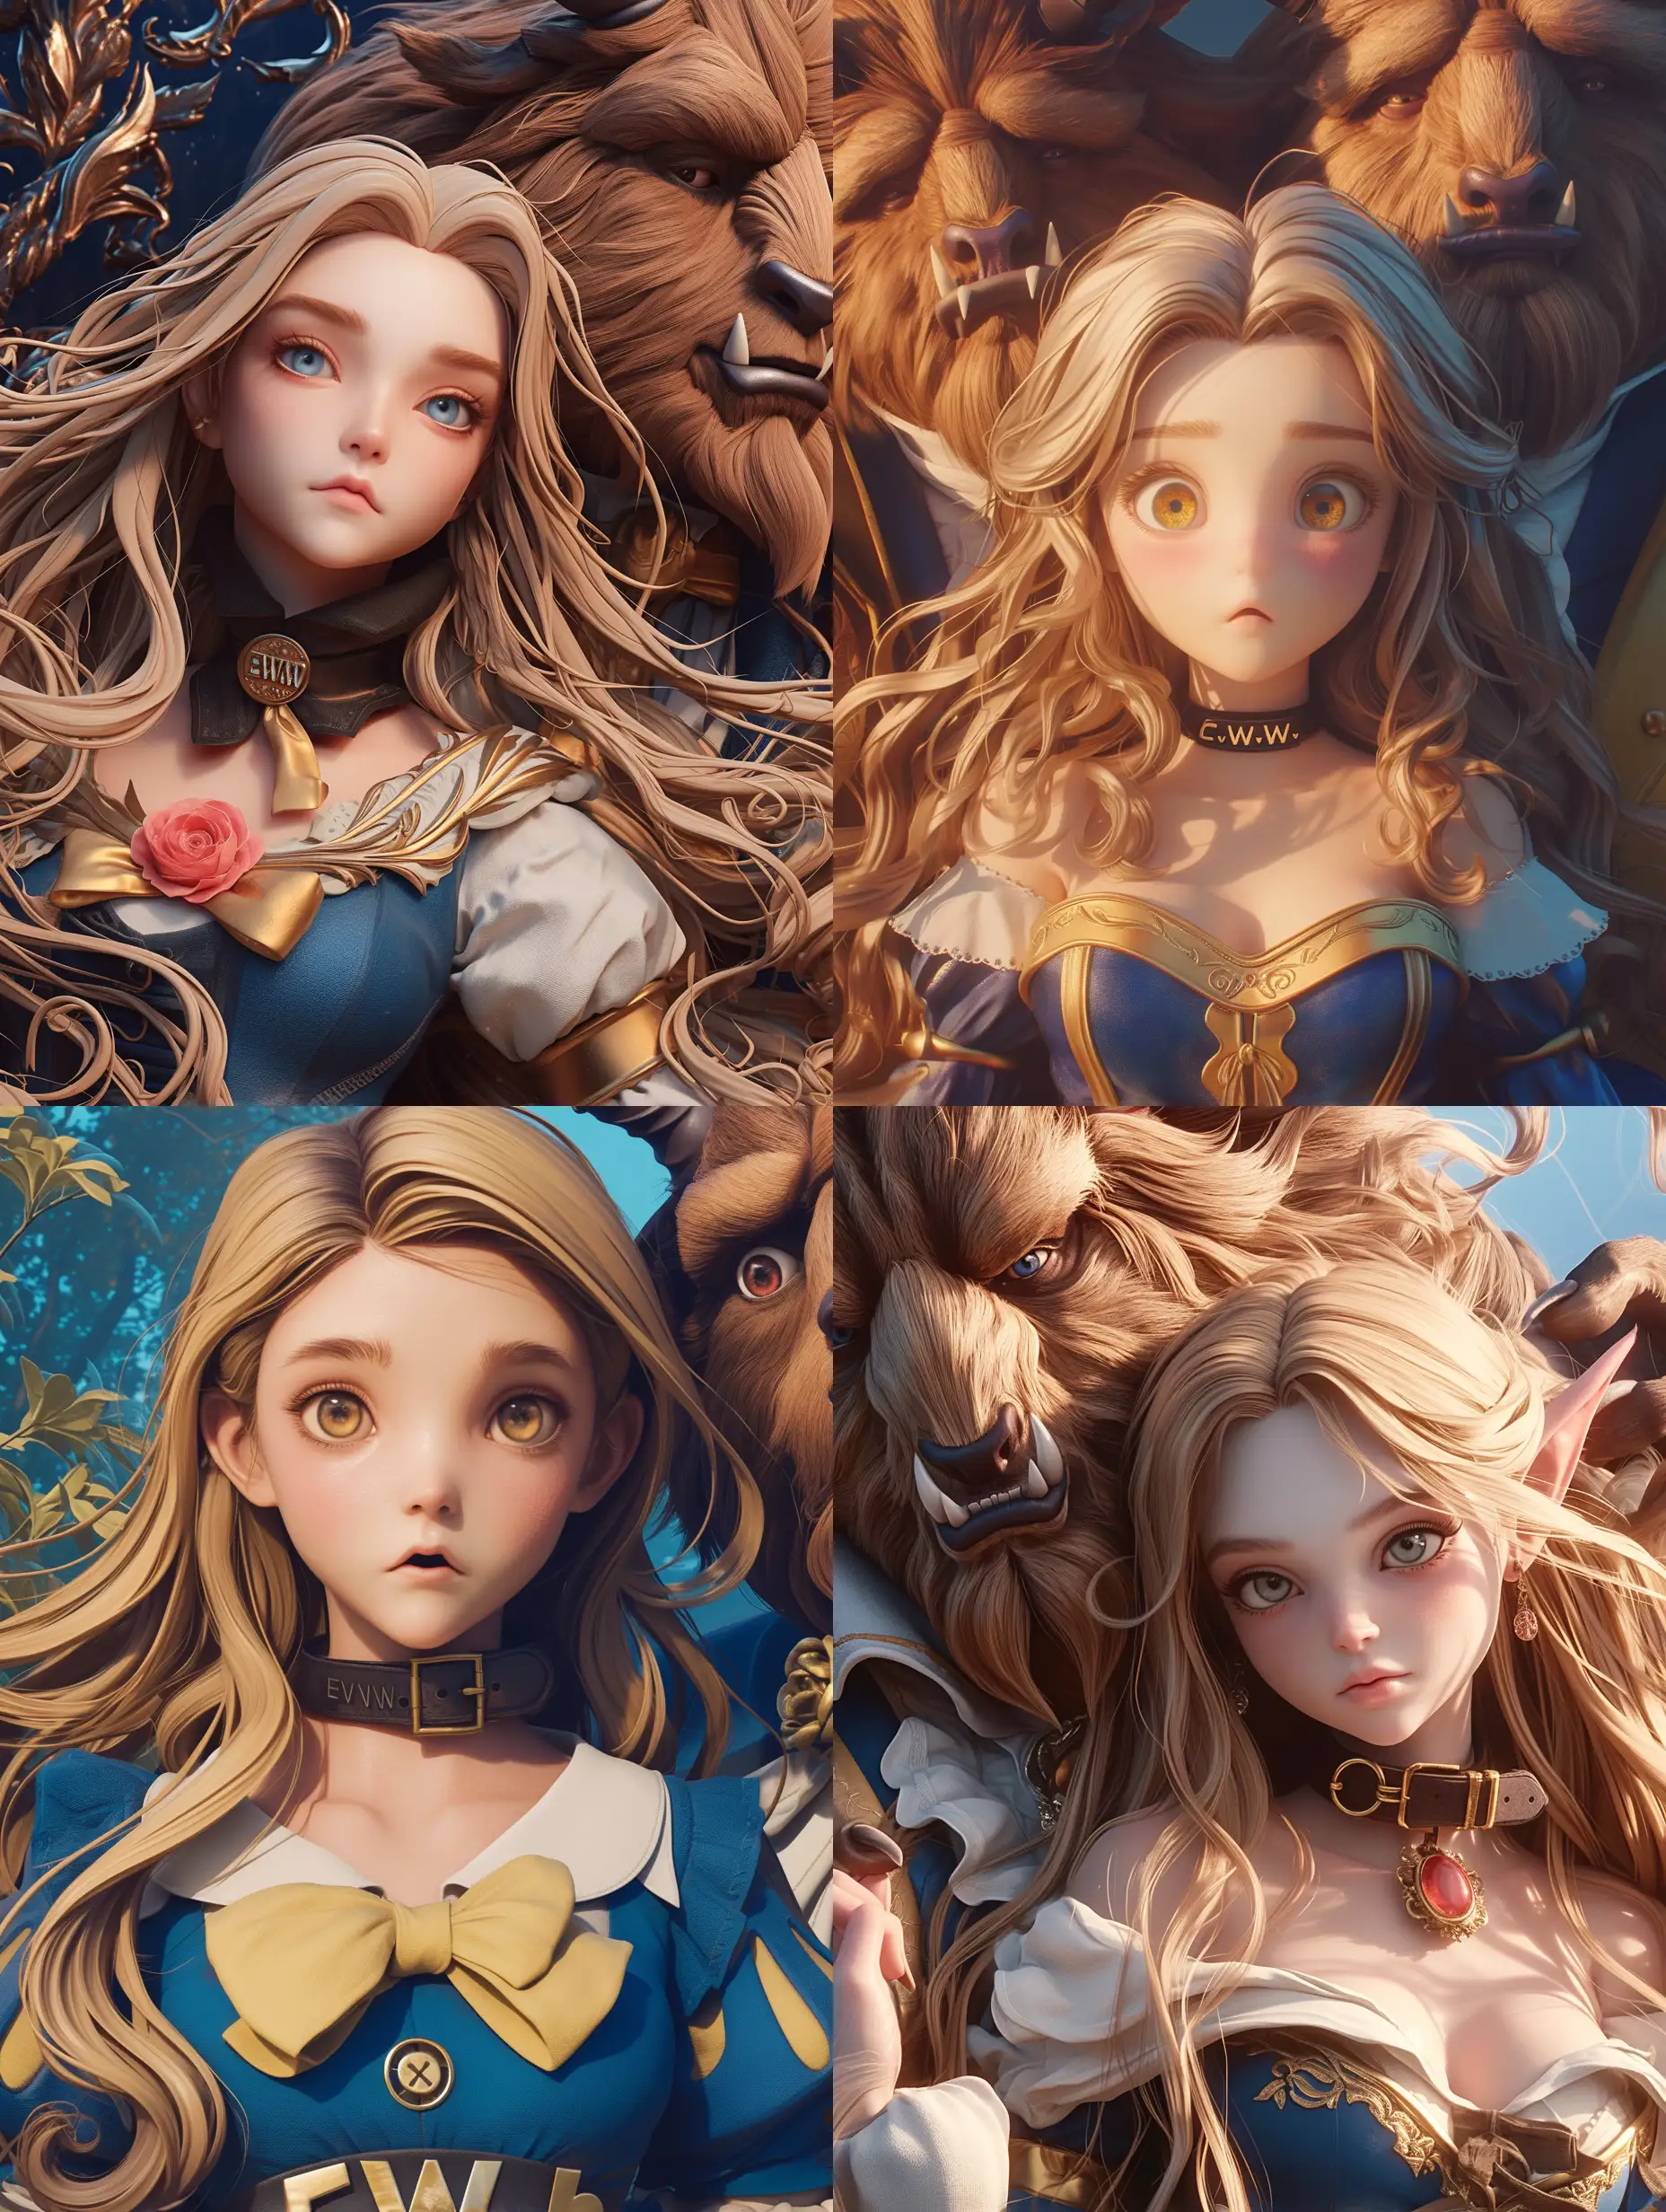 Ultra-Wide Angle, ein süsses Anime mädchen , lange blonde haare, trägt ein halsband mit der inschrift "EWW" ,als Beauty,  neben ihr das Beast von Beauty and the Beast in einer Märchenszene,  ultra realistic, high quality CGI VFX fine art, ZBrush HDR | color grading | dark shadows | ambient occlusion | high resolution | intricate | hyperrealistic textures, against an ultra-realistic background with high details and surreal elements. :: anime::-0.1 --niji 6 --s 250